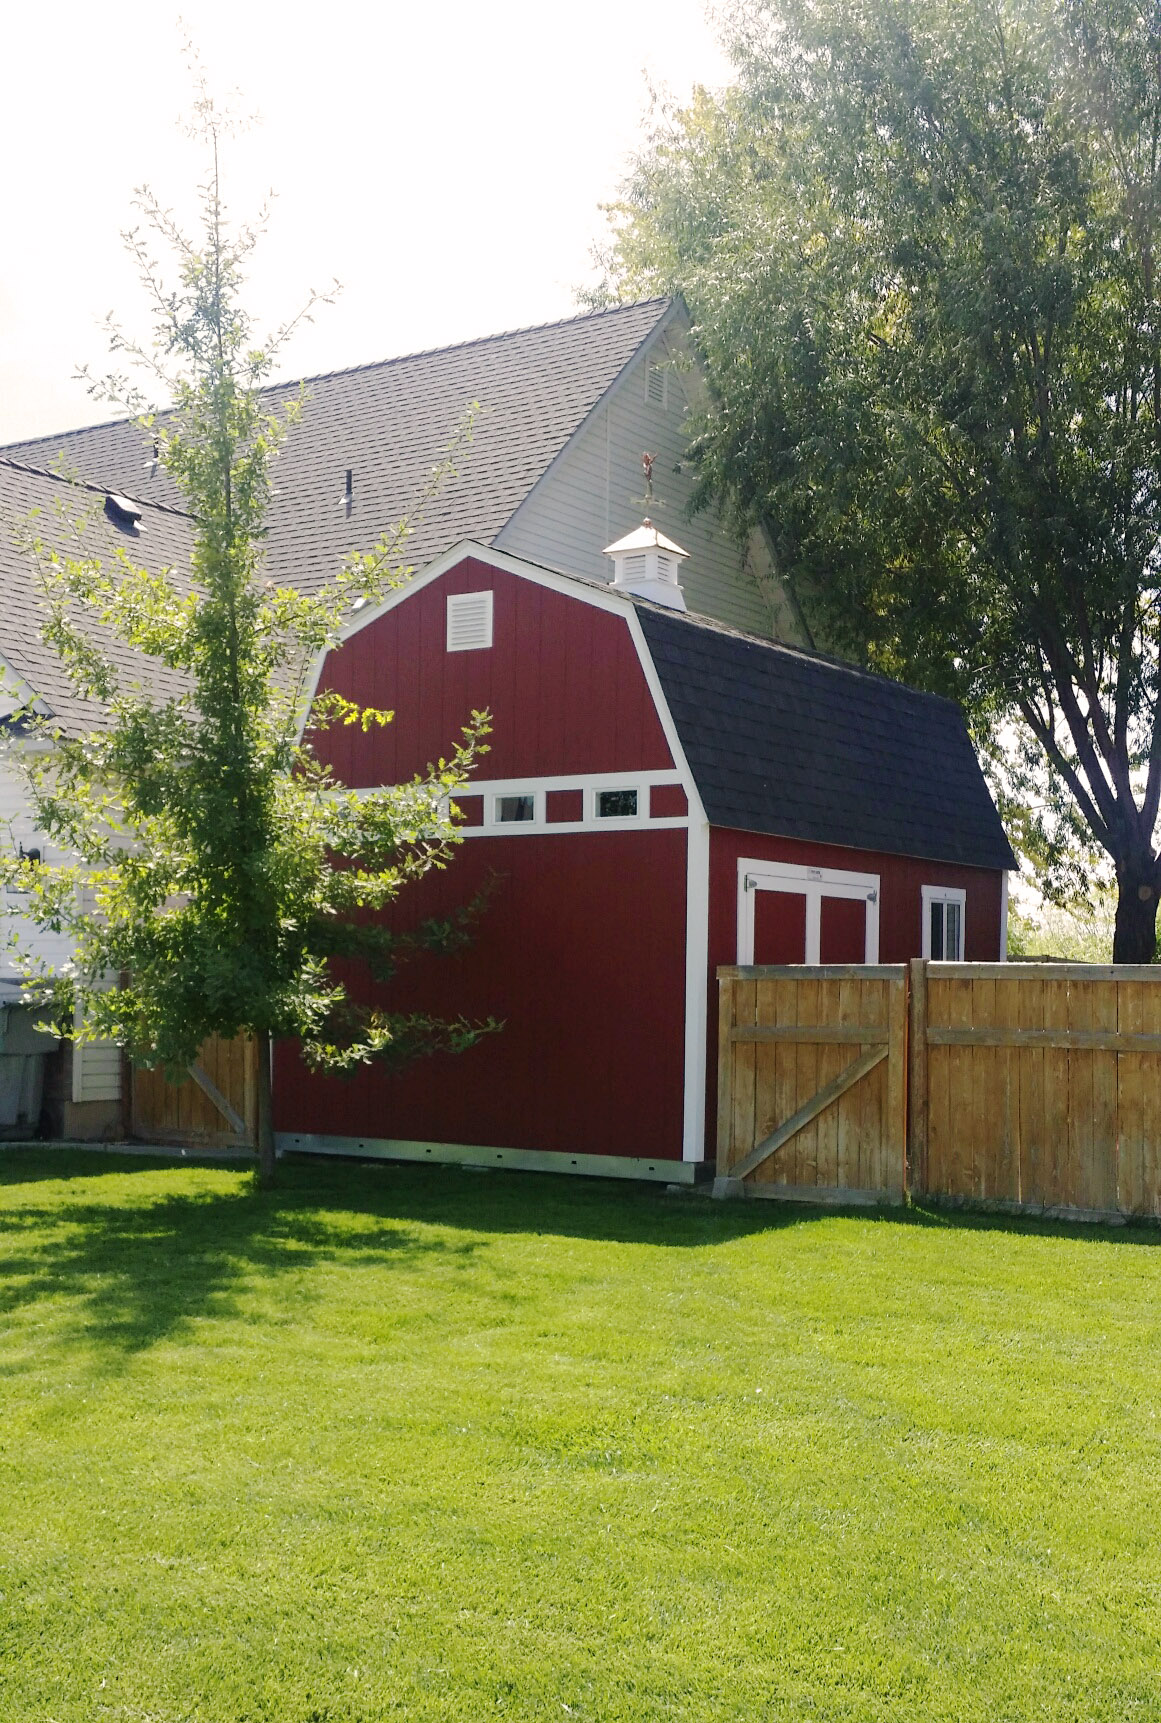 A Barn Without a Farm – Tuff Shed